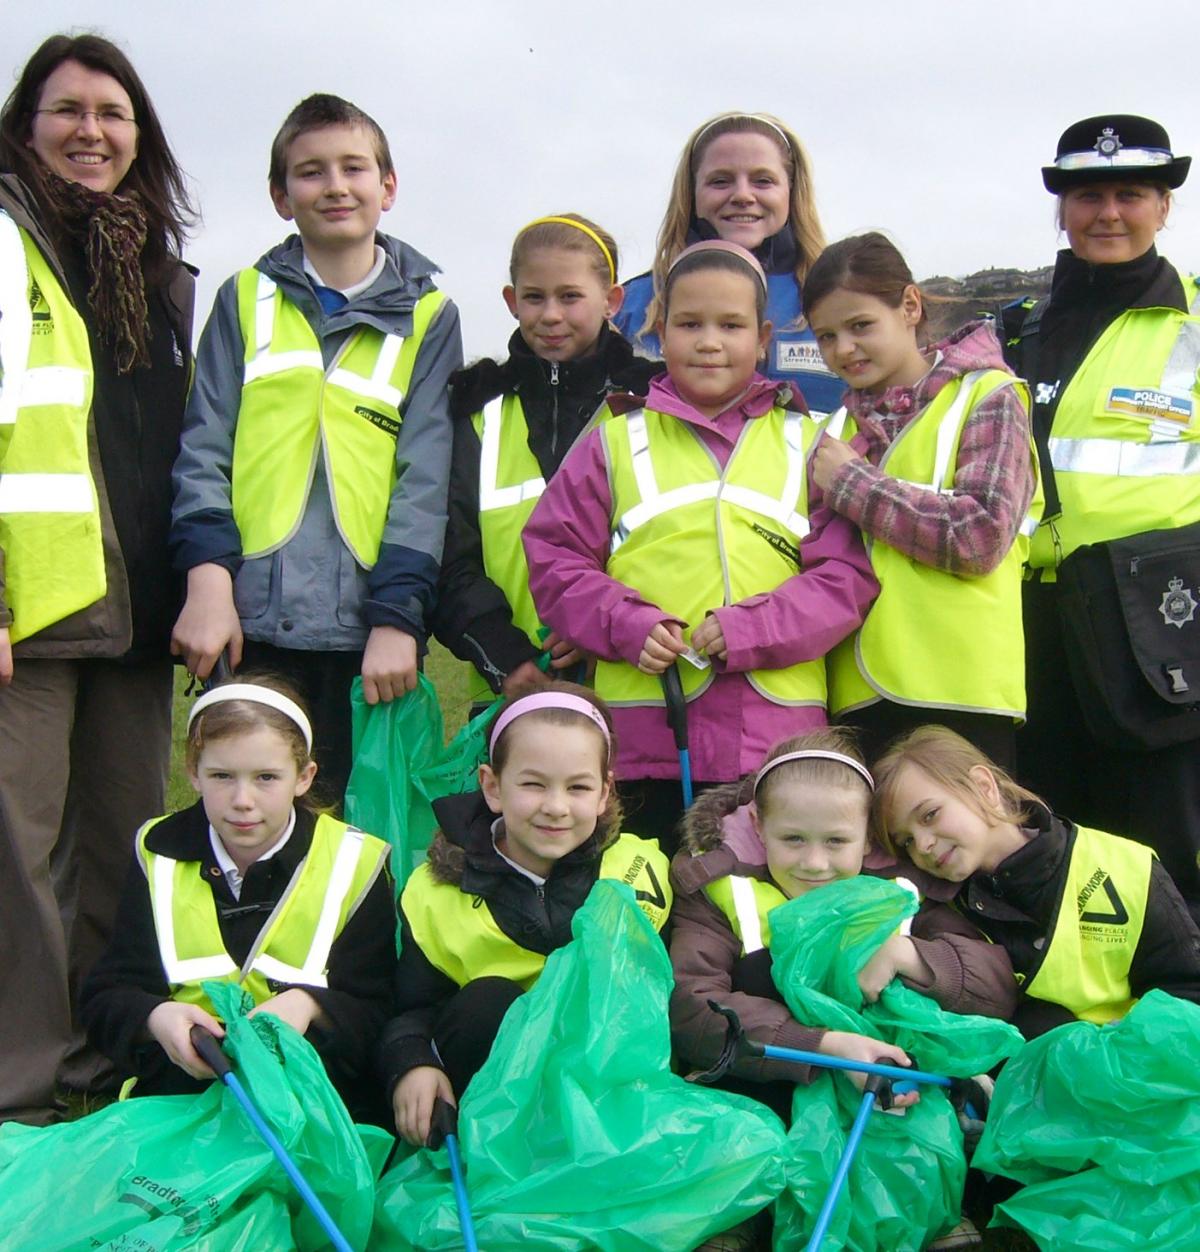 Community-spirited pupils at a Shipley primary school joined wardens in a purge on litter in their neighbourhood. 